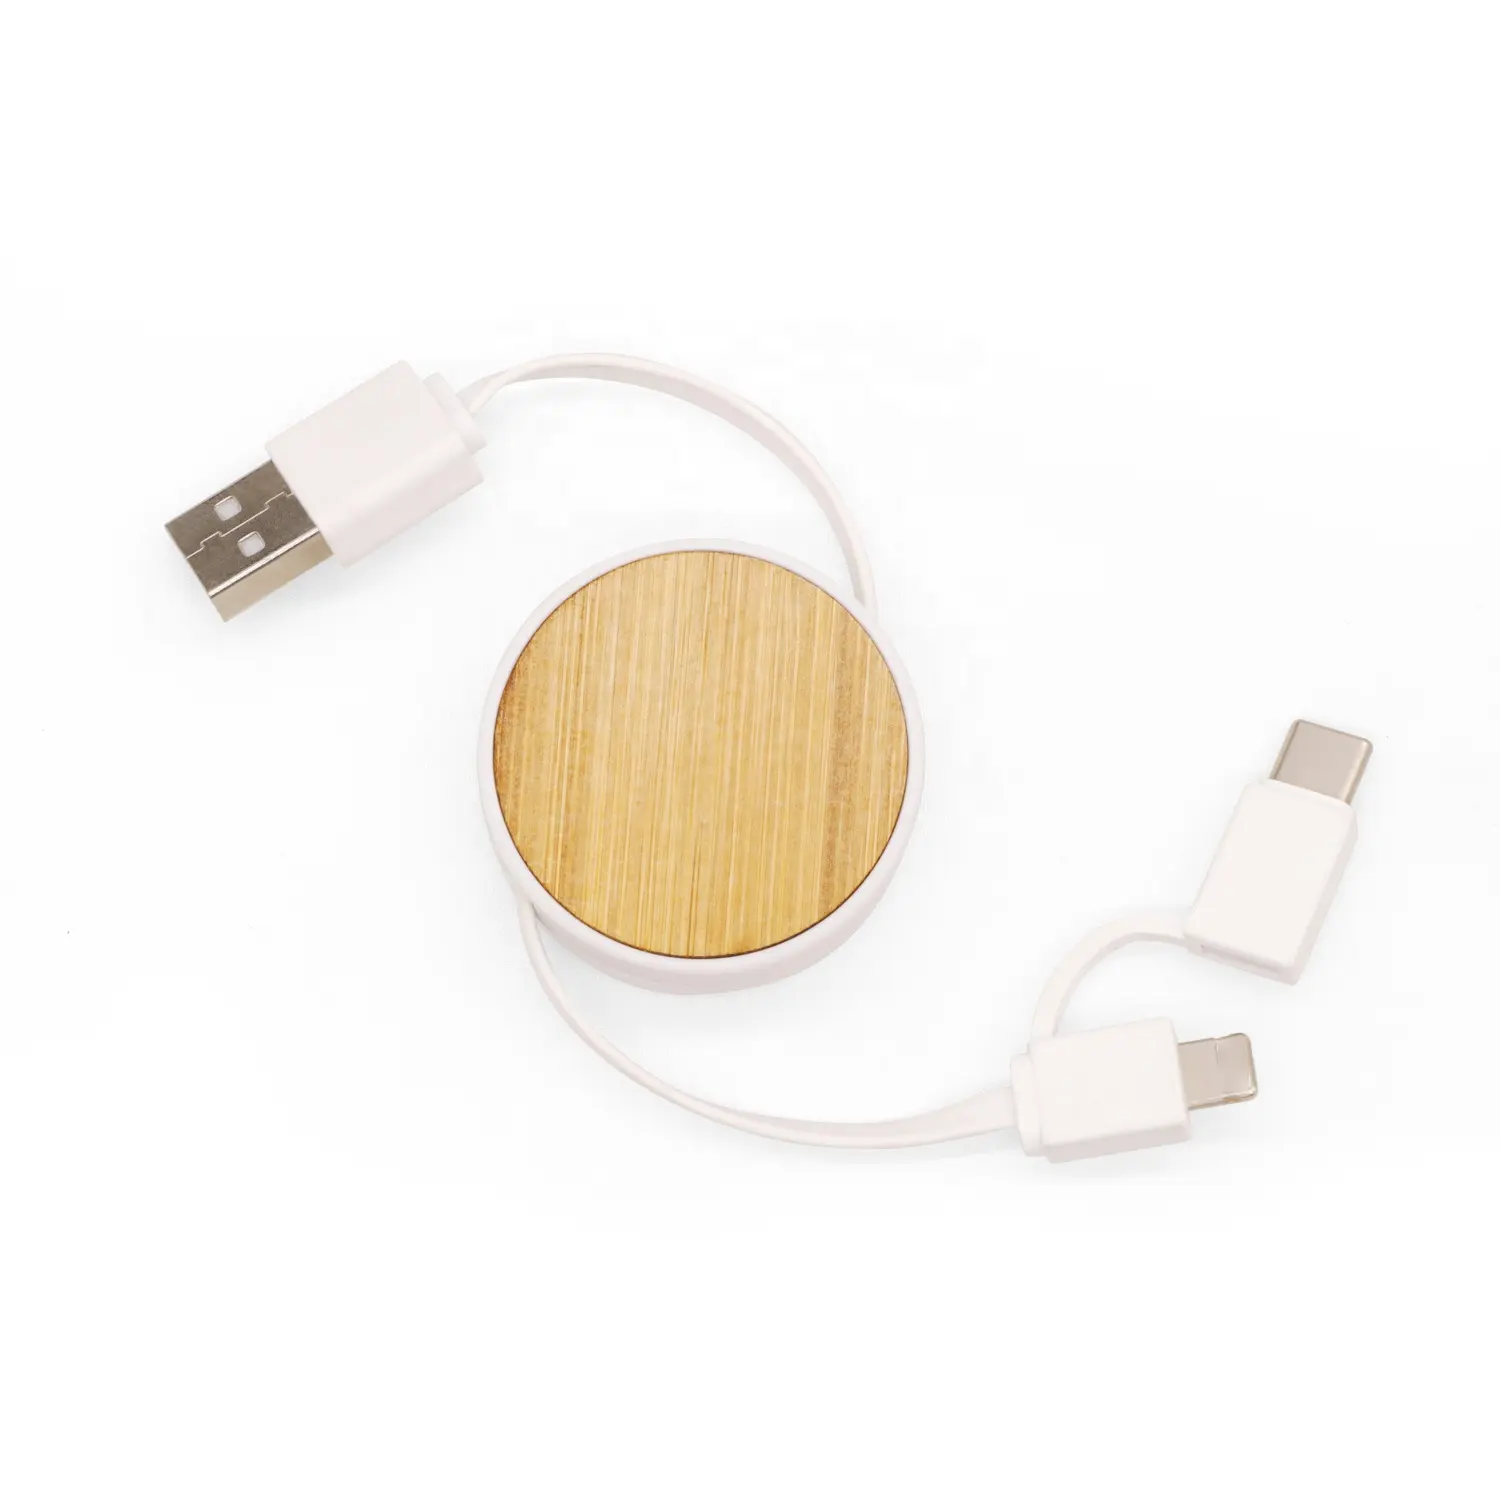 New design 3 in 1 bamboo Micro Type-c usb cable for iPhone Charging Cable Portable Retractable Fast Charging cord